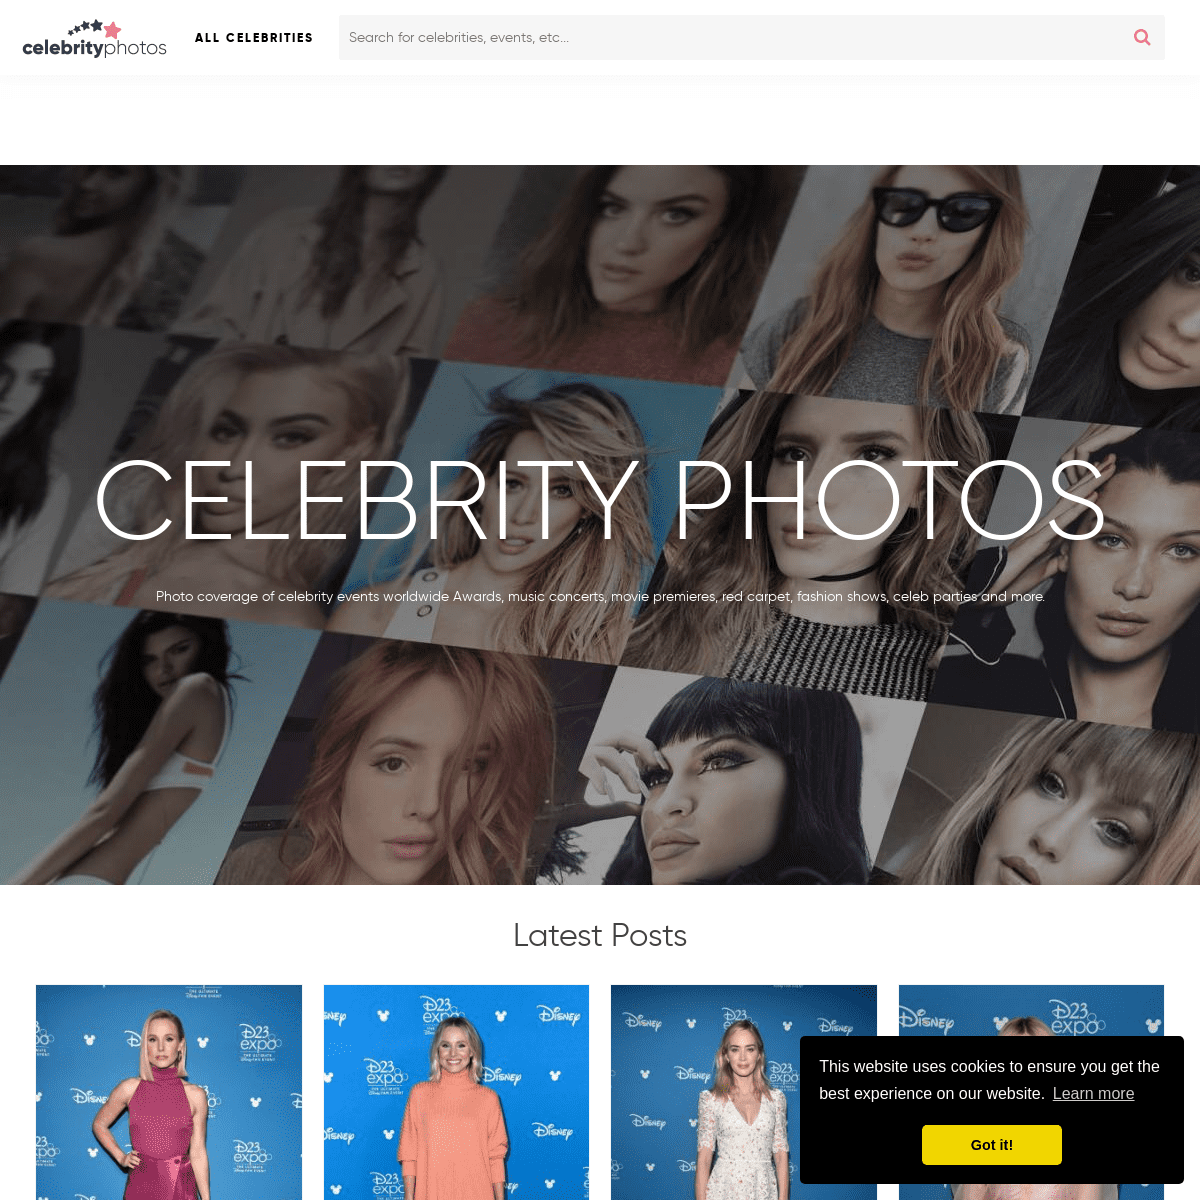 Celebrity Photos - Photo coverage of celebrity events worldwide Awards, music concerts, movie premieres, red carpet, fashion sho